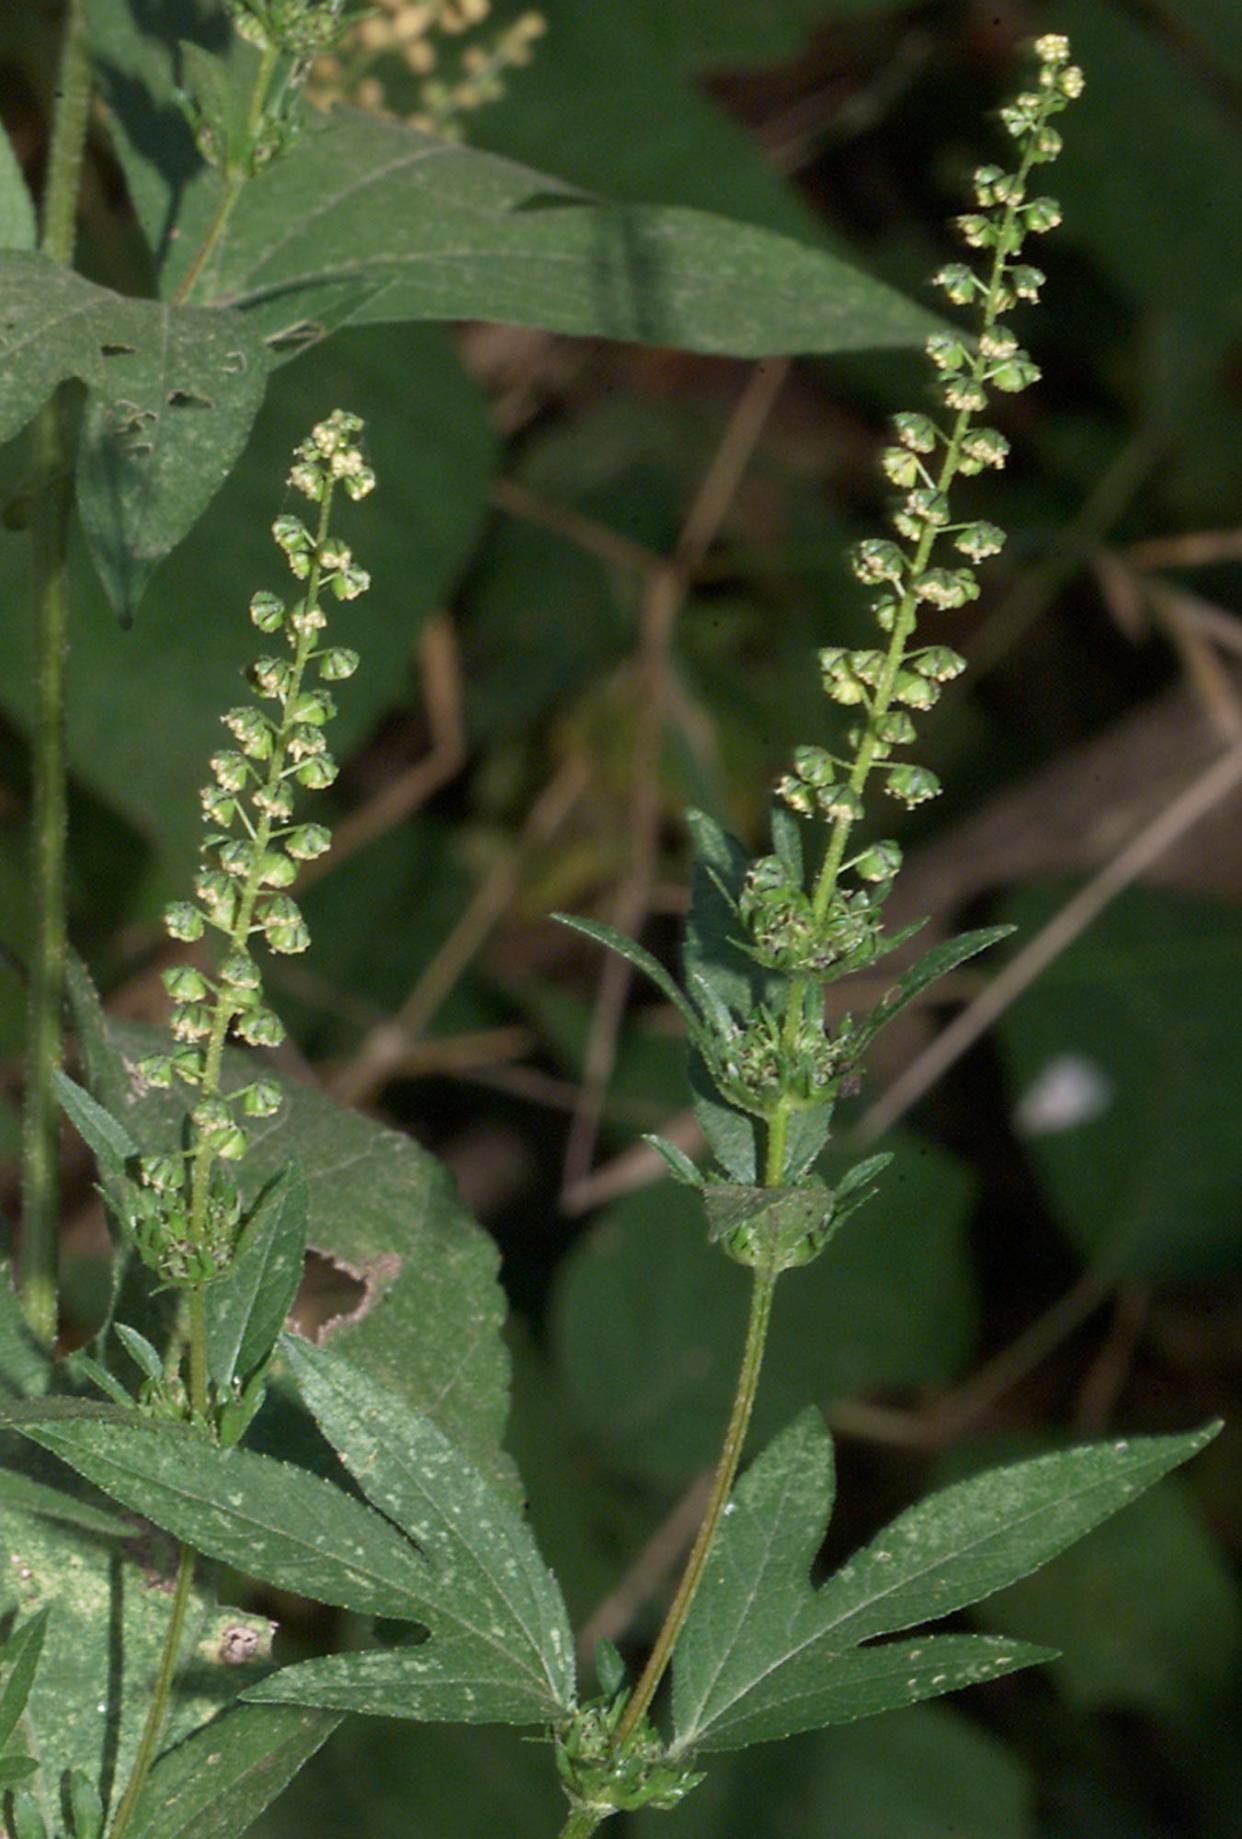 If your nose hasn't already told you, It's hay fever season thanks to ragweed.